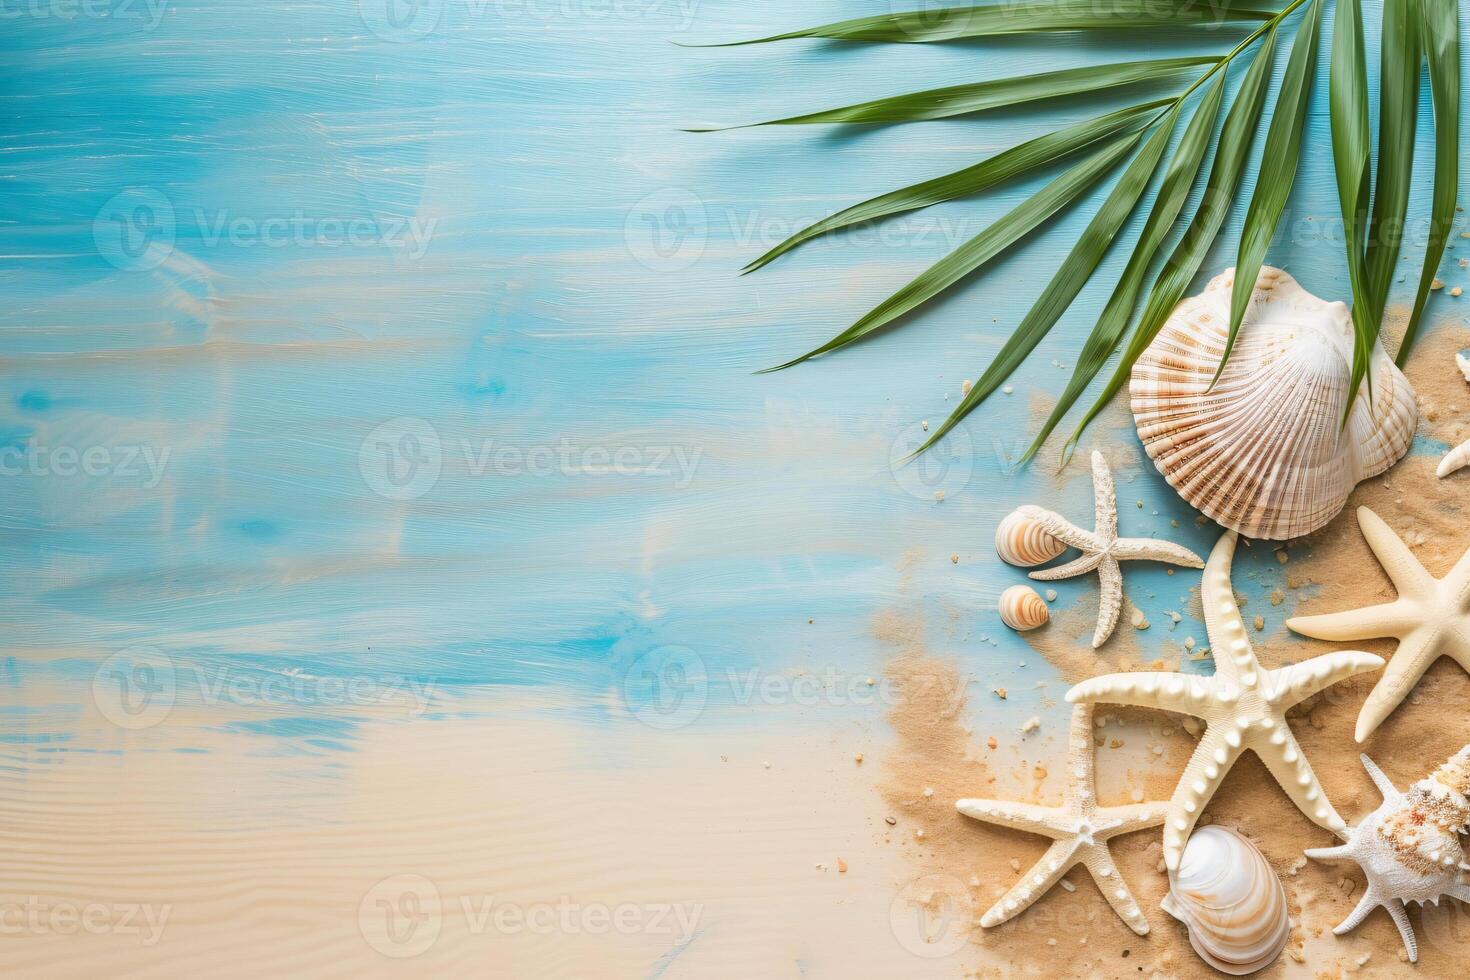 photo beach background with beach elements